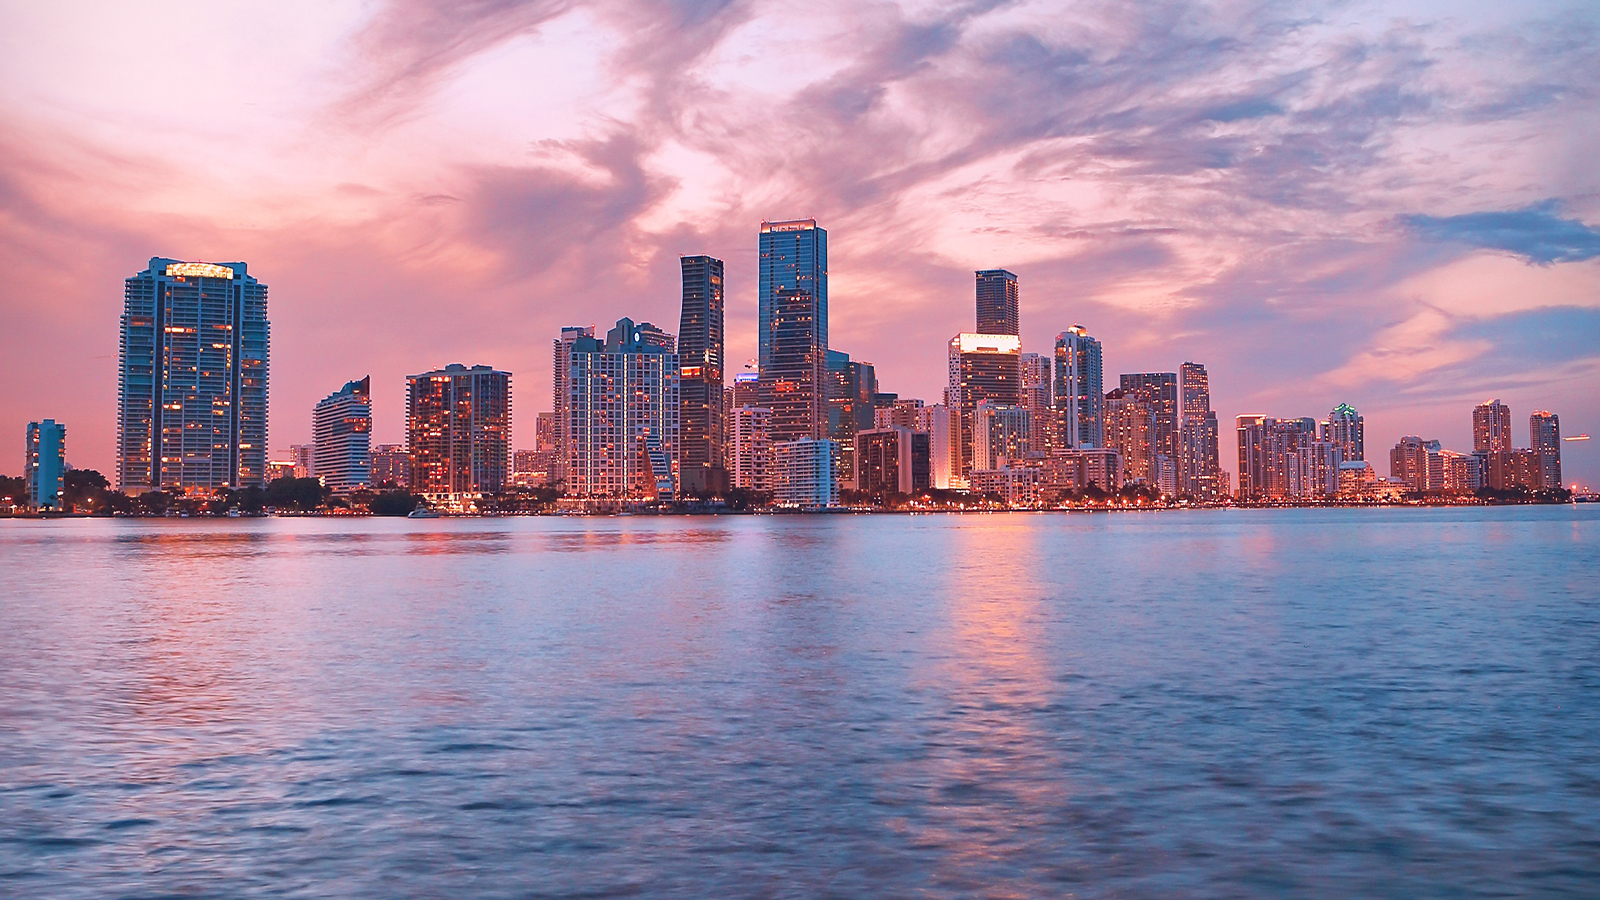 Miami skyline at sunset with the ocean in the foreground.